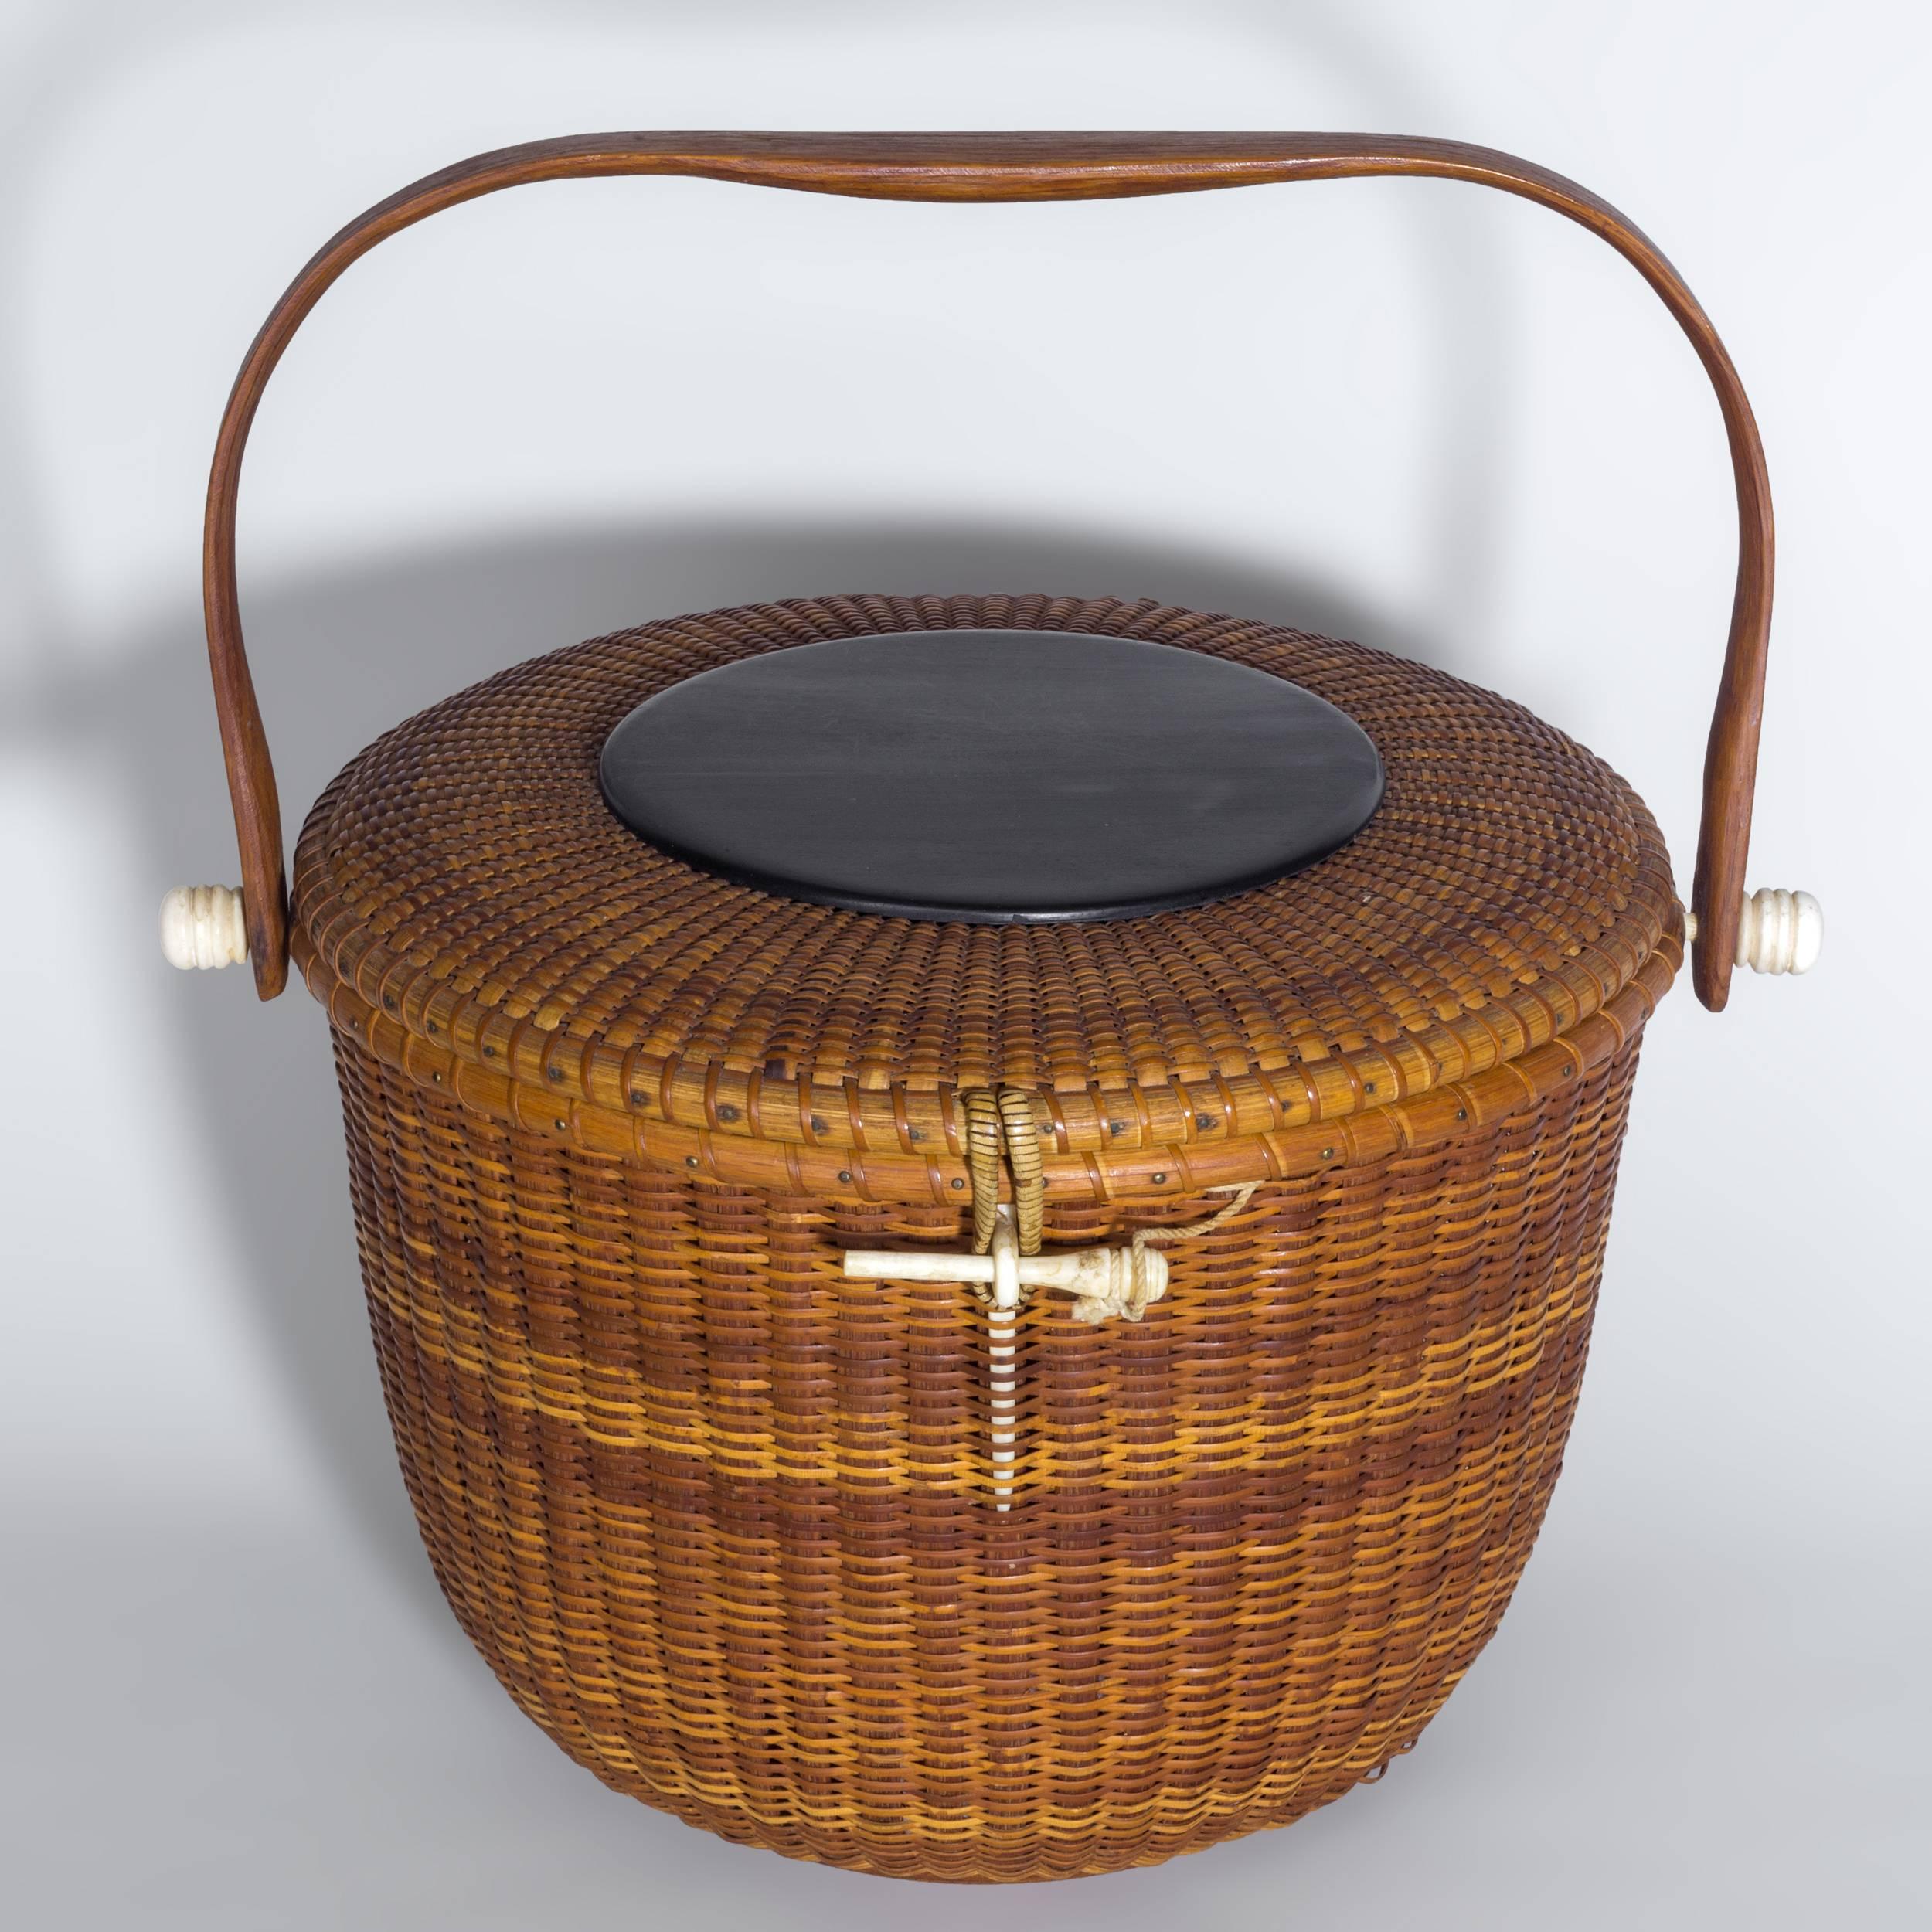 Rare large round form with sizable unembellished ebony top with great deep black color. Handle affixed to rattan-woven body by boldly turned knobs, with carved eye and turned peg for closure. Exterior base clearly inscribed 